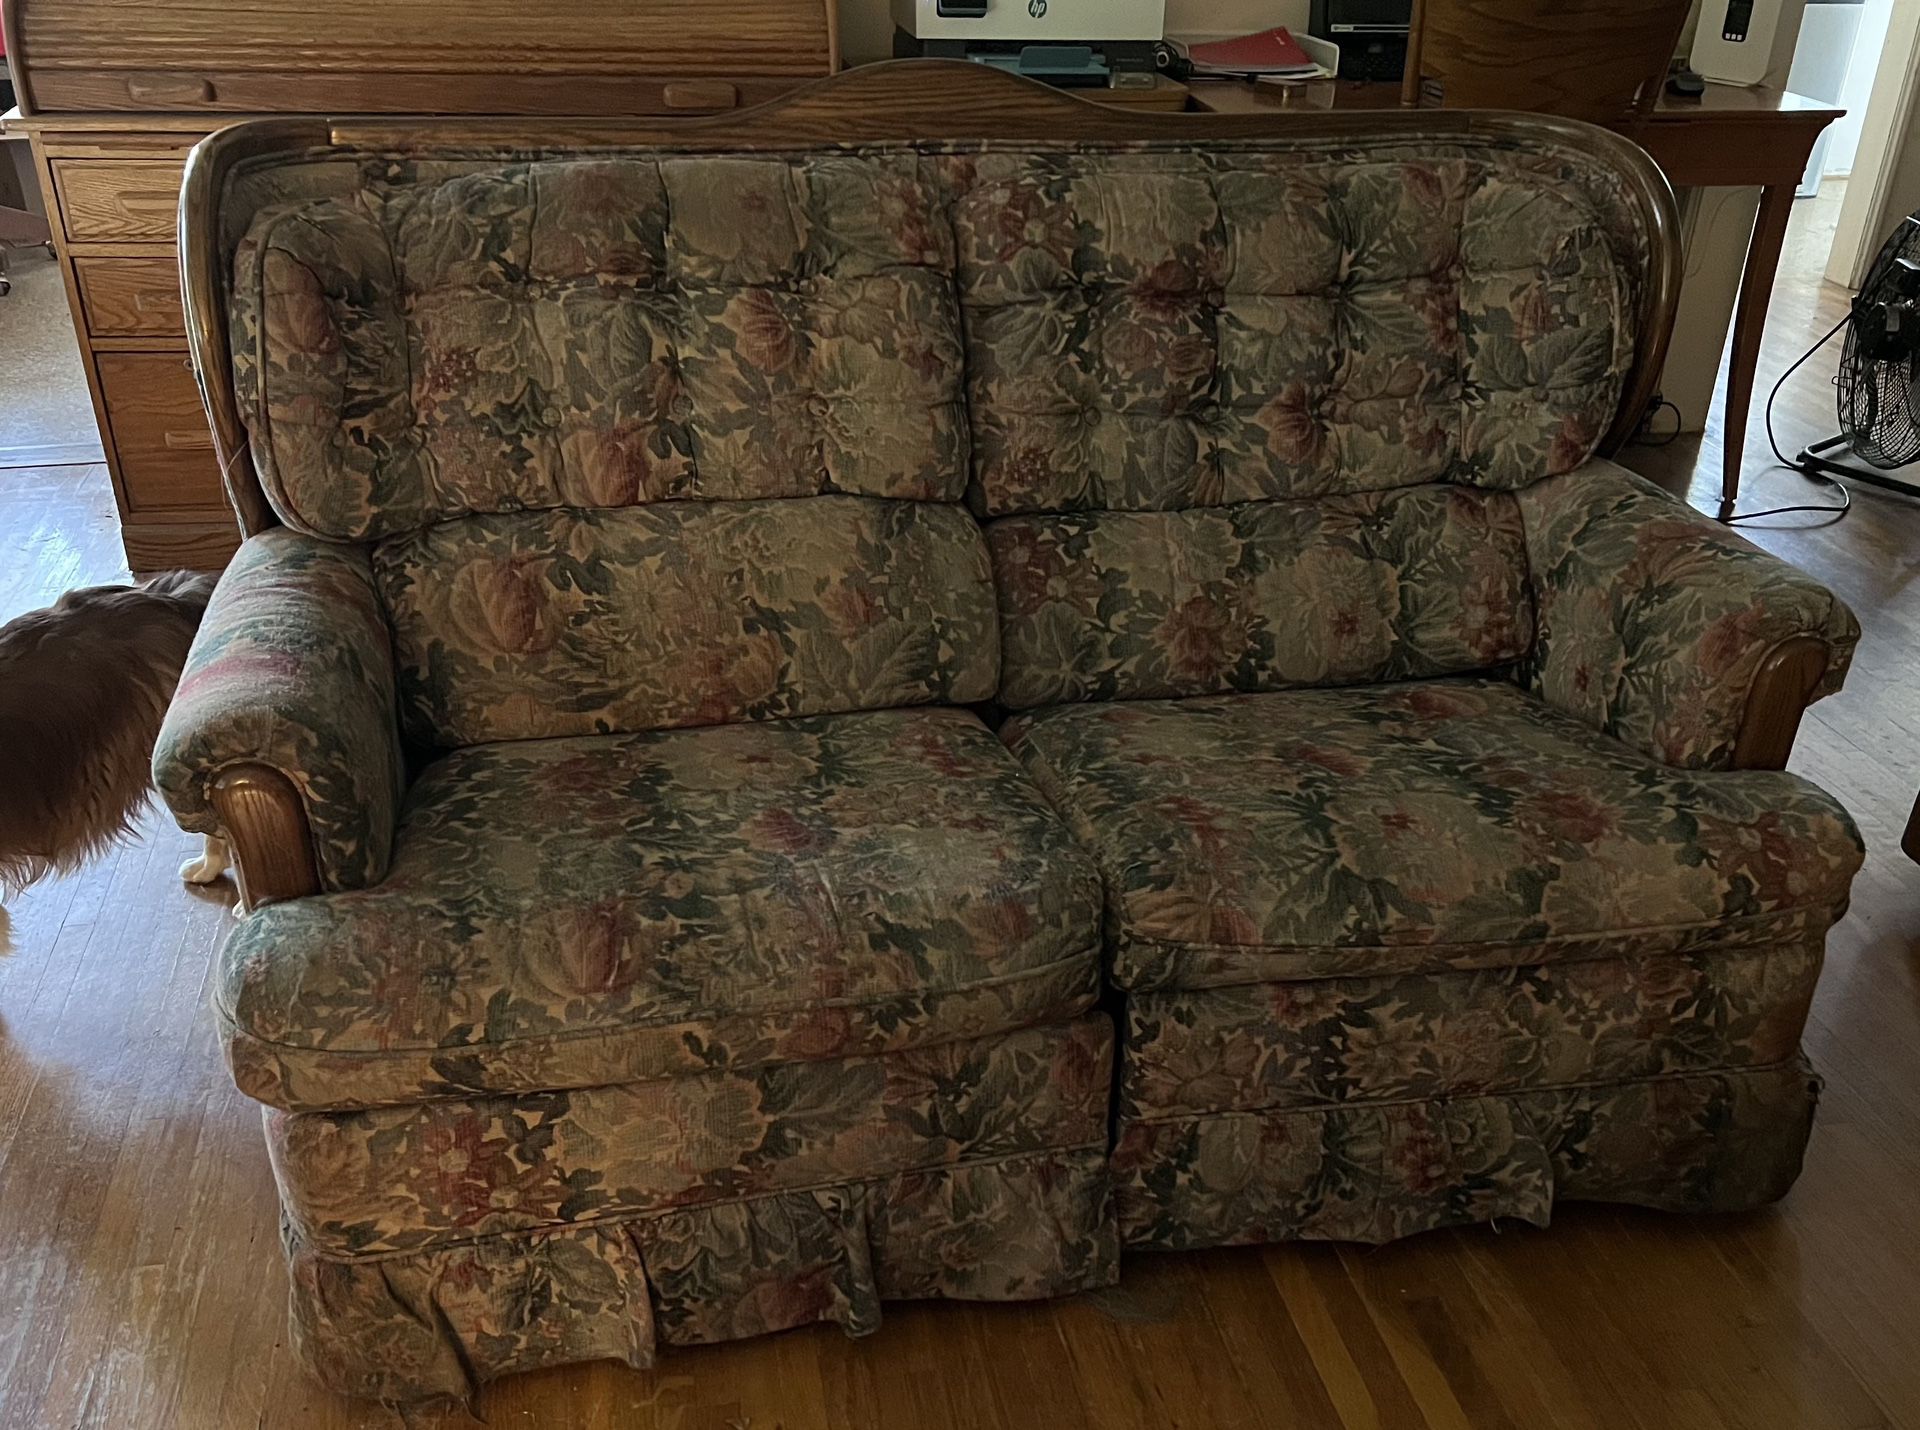 Vintage Floral Couch and Loveseat Set